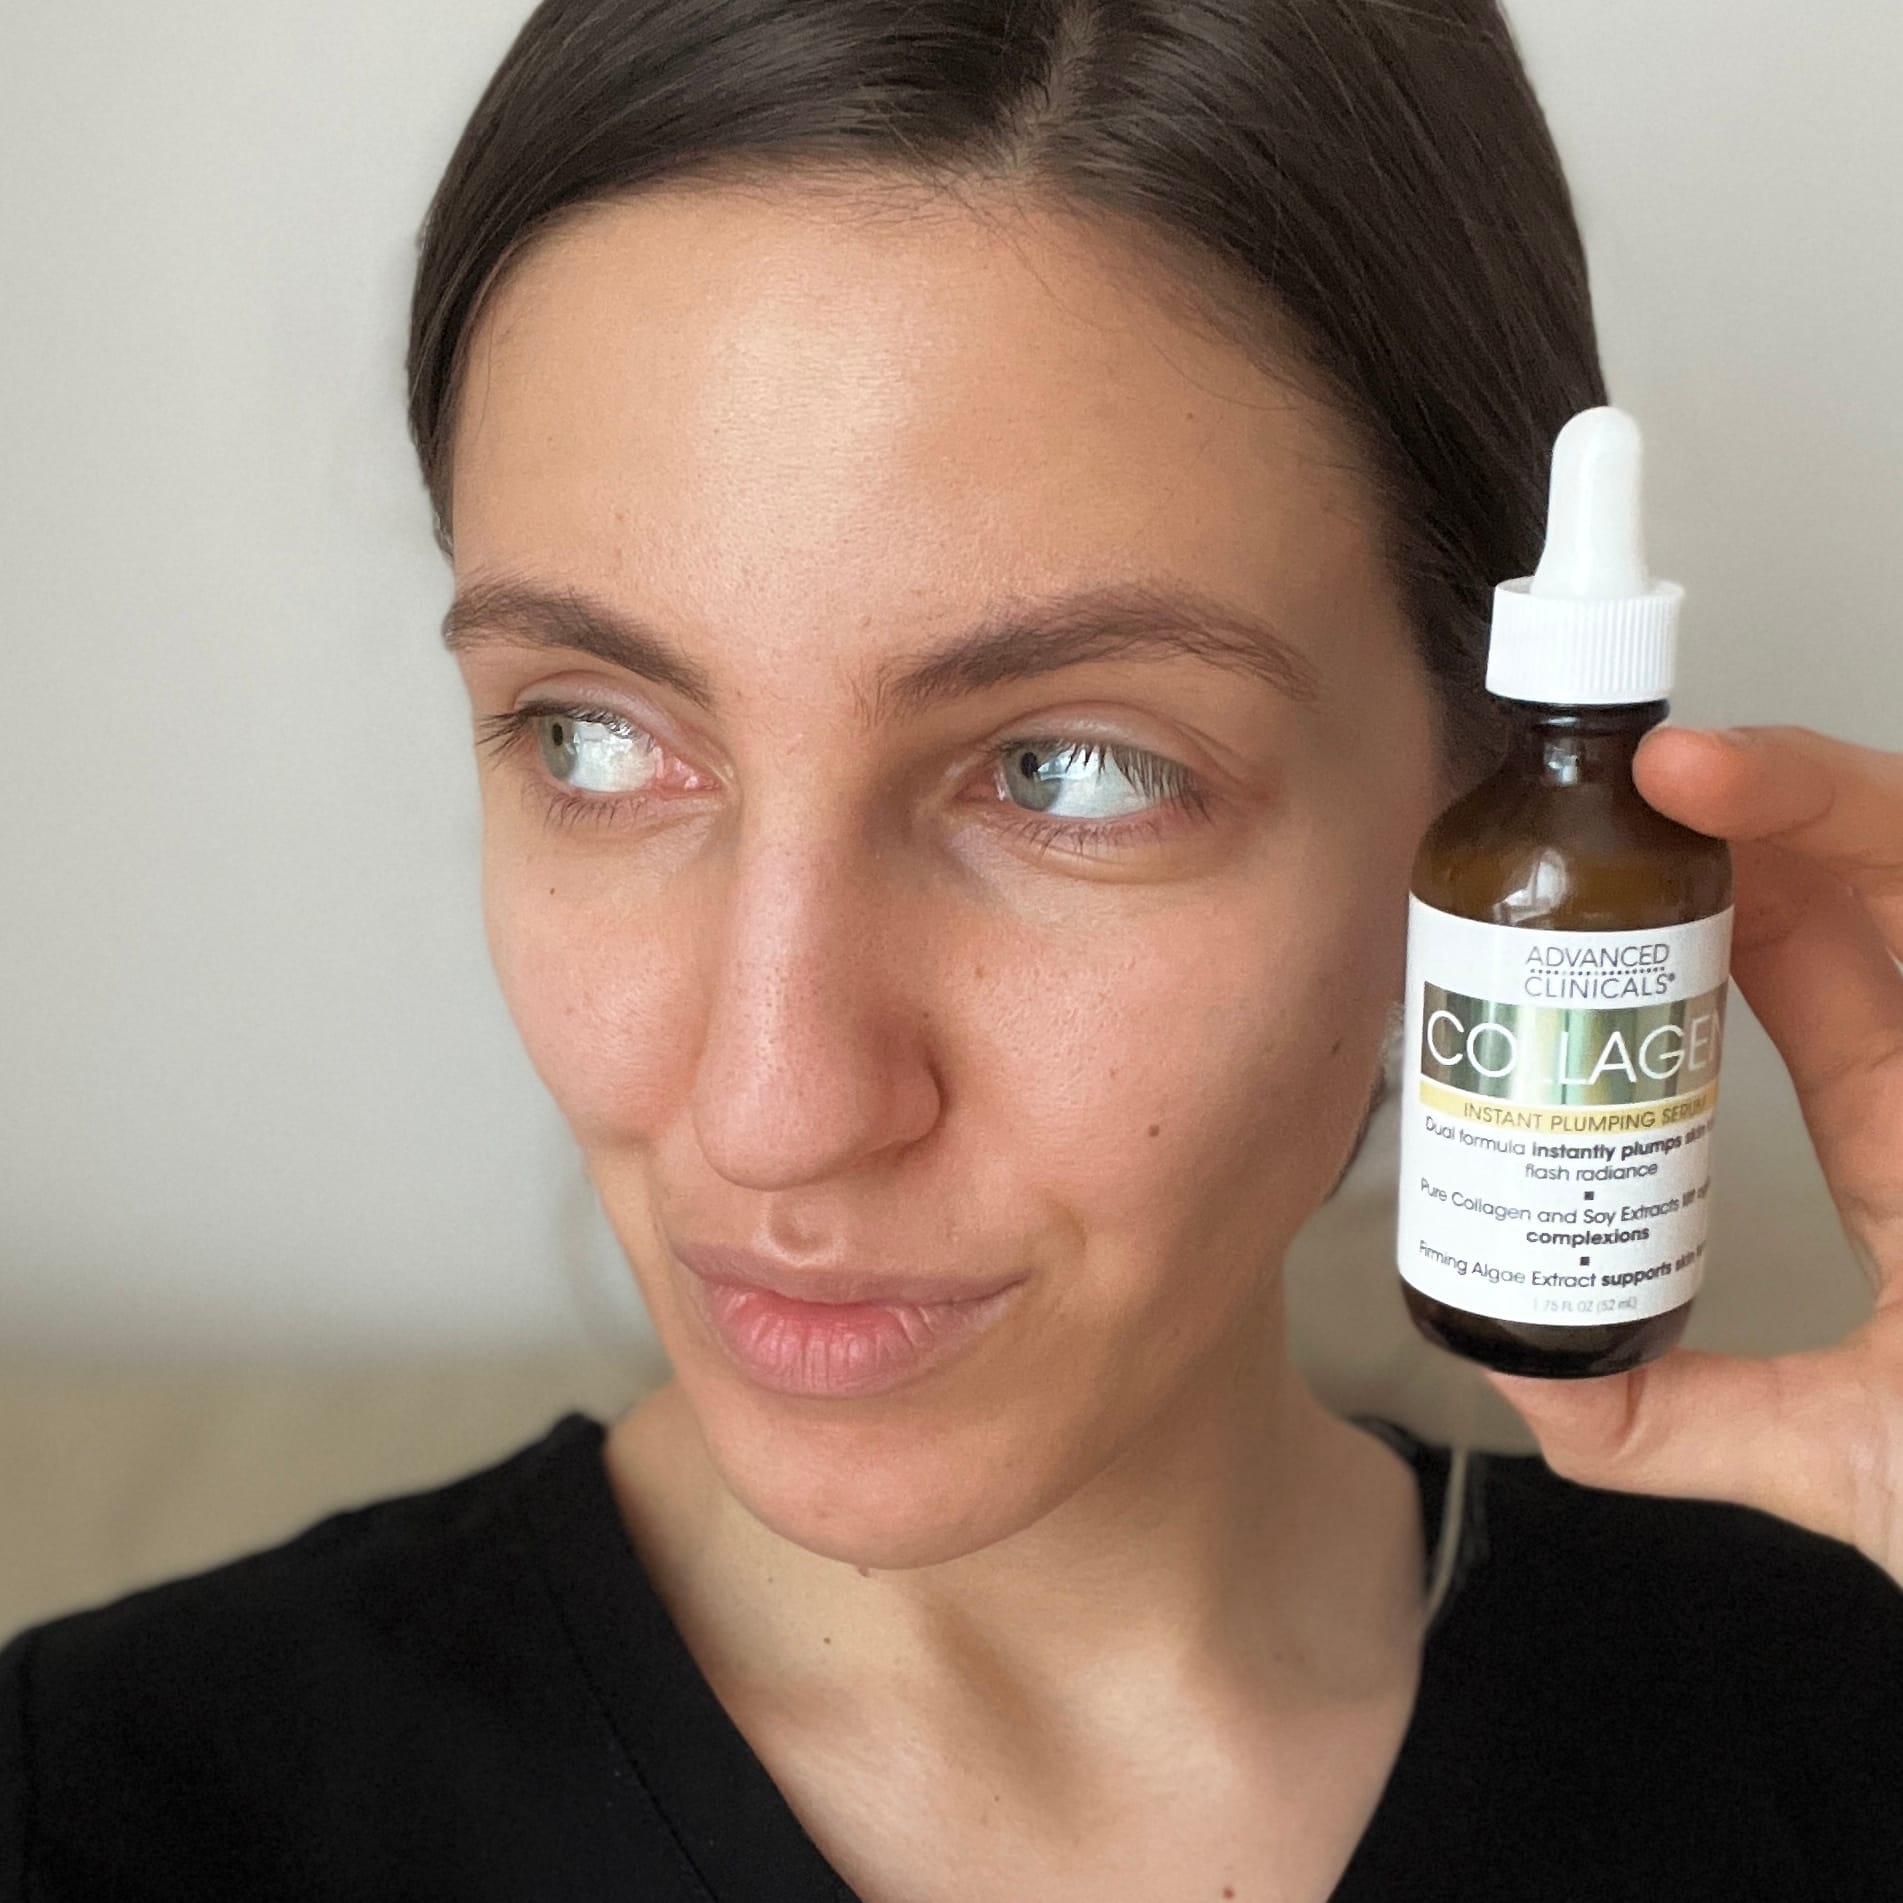 Advanced Clinicals Collagen Serum: A Product Review